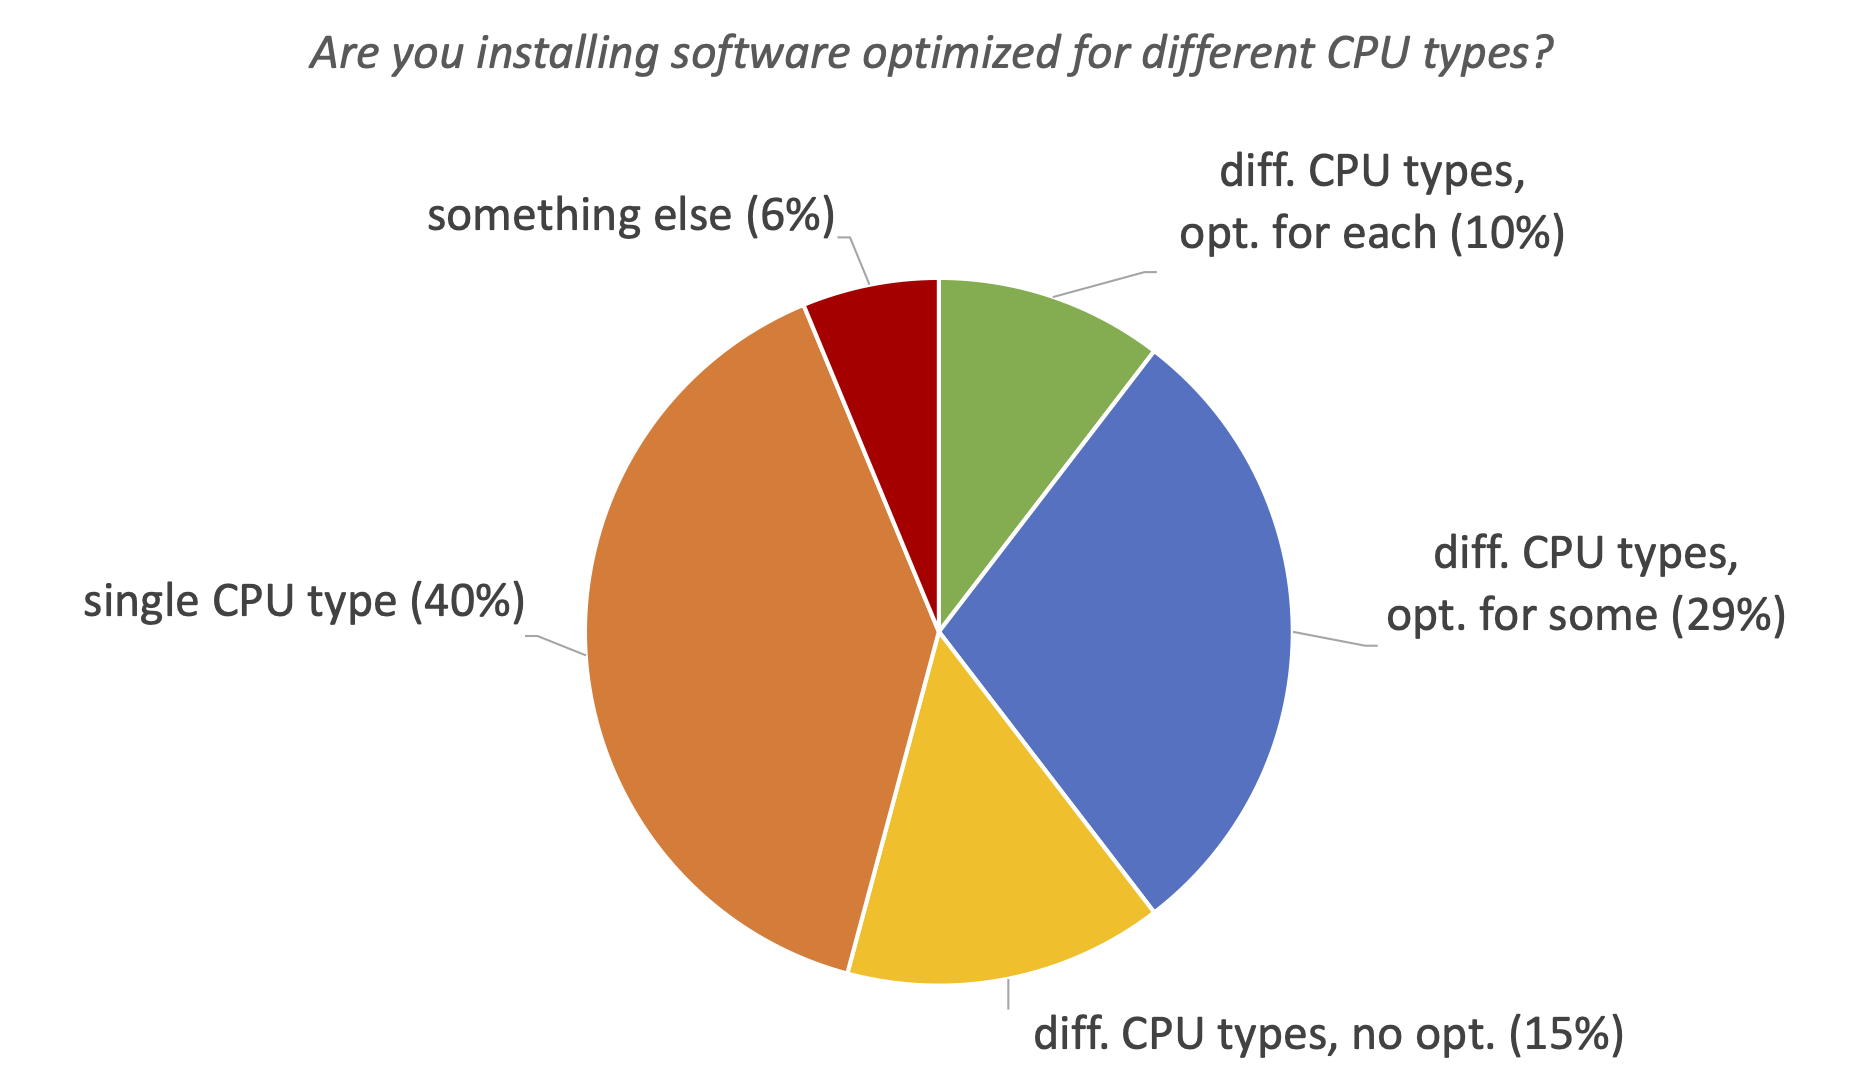 12. Are you installing software optimized for different CPU types?